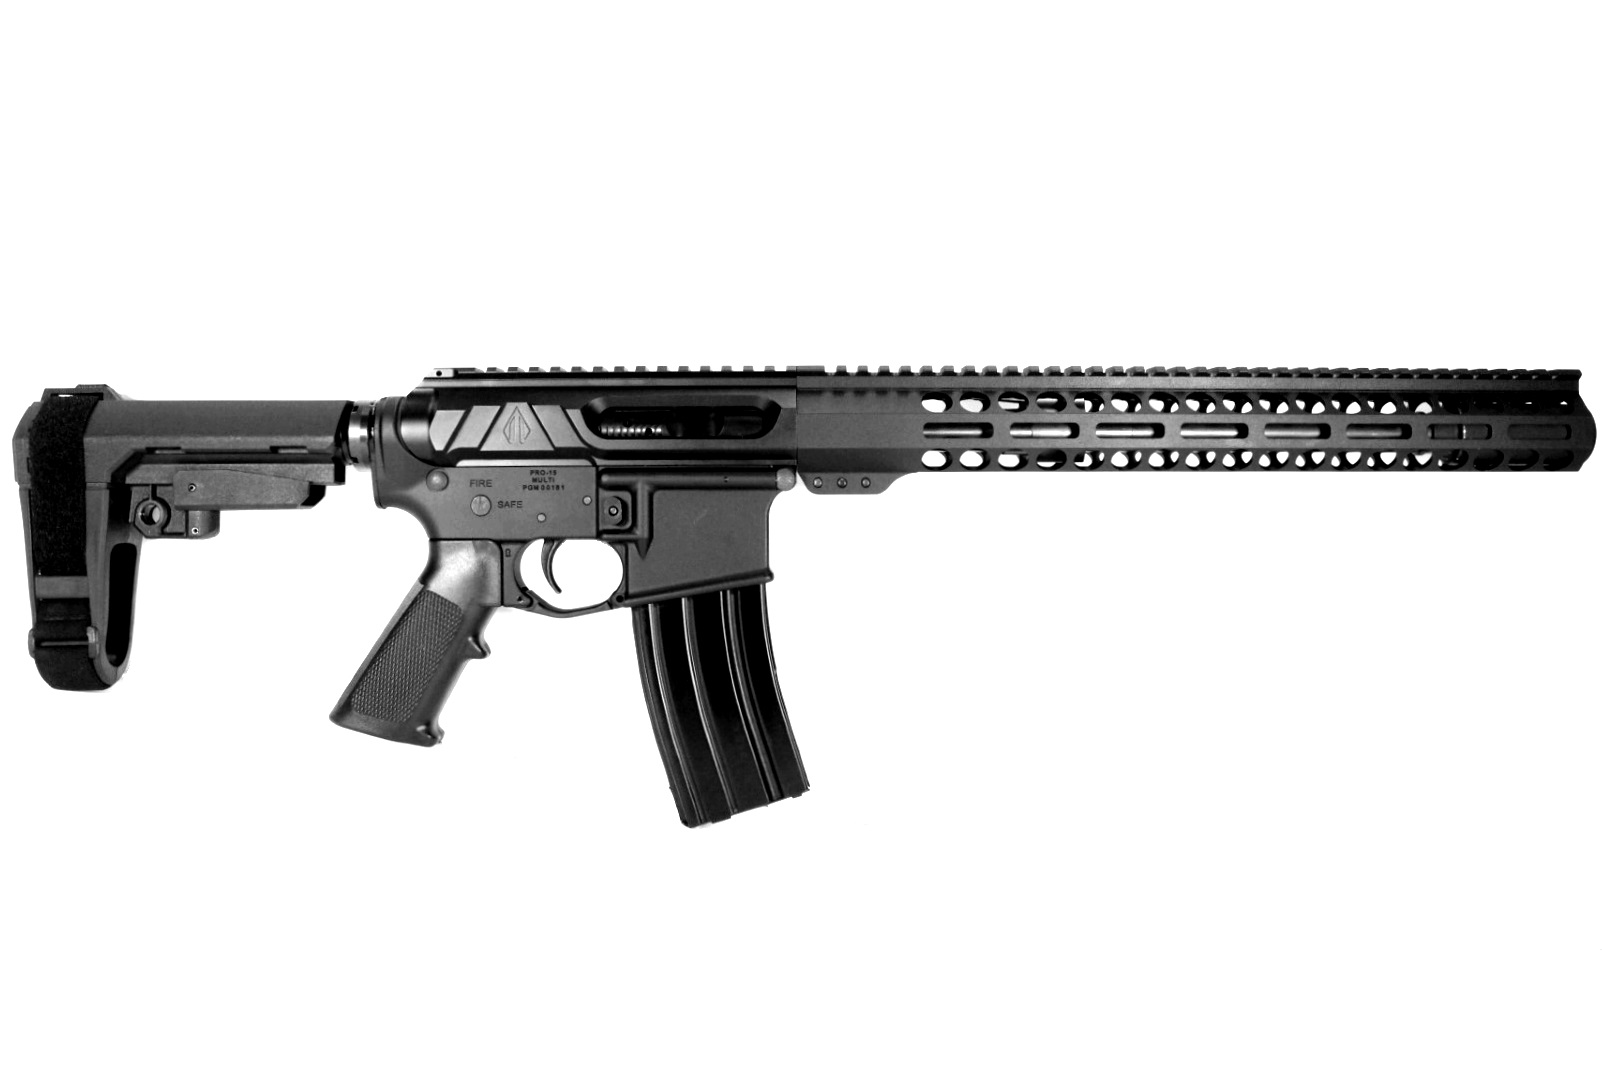 12.5 inch 300 Blackout Side Charging AR Pistol | Pro2a Tactical